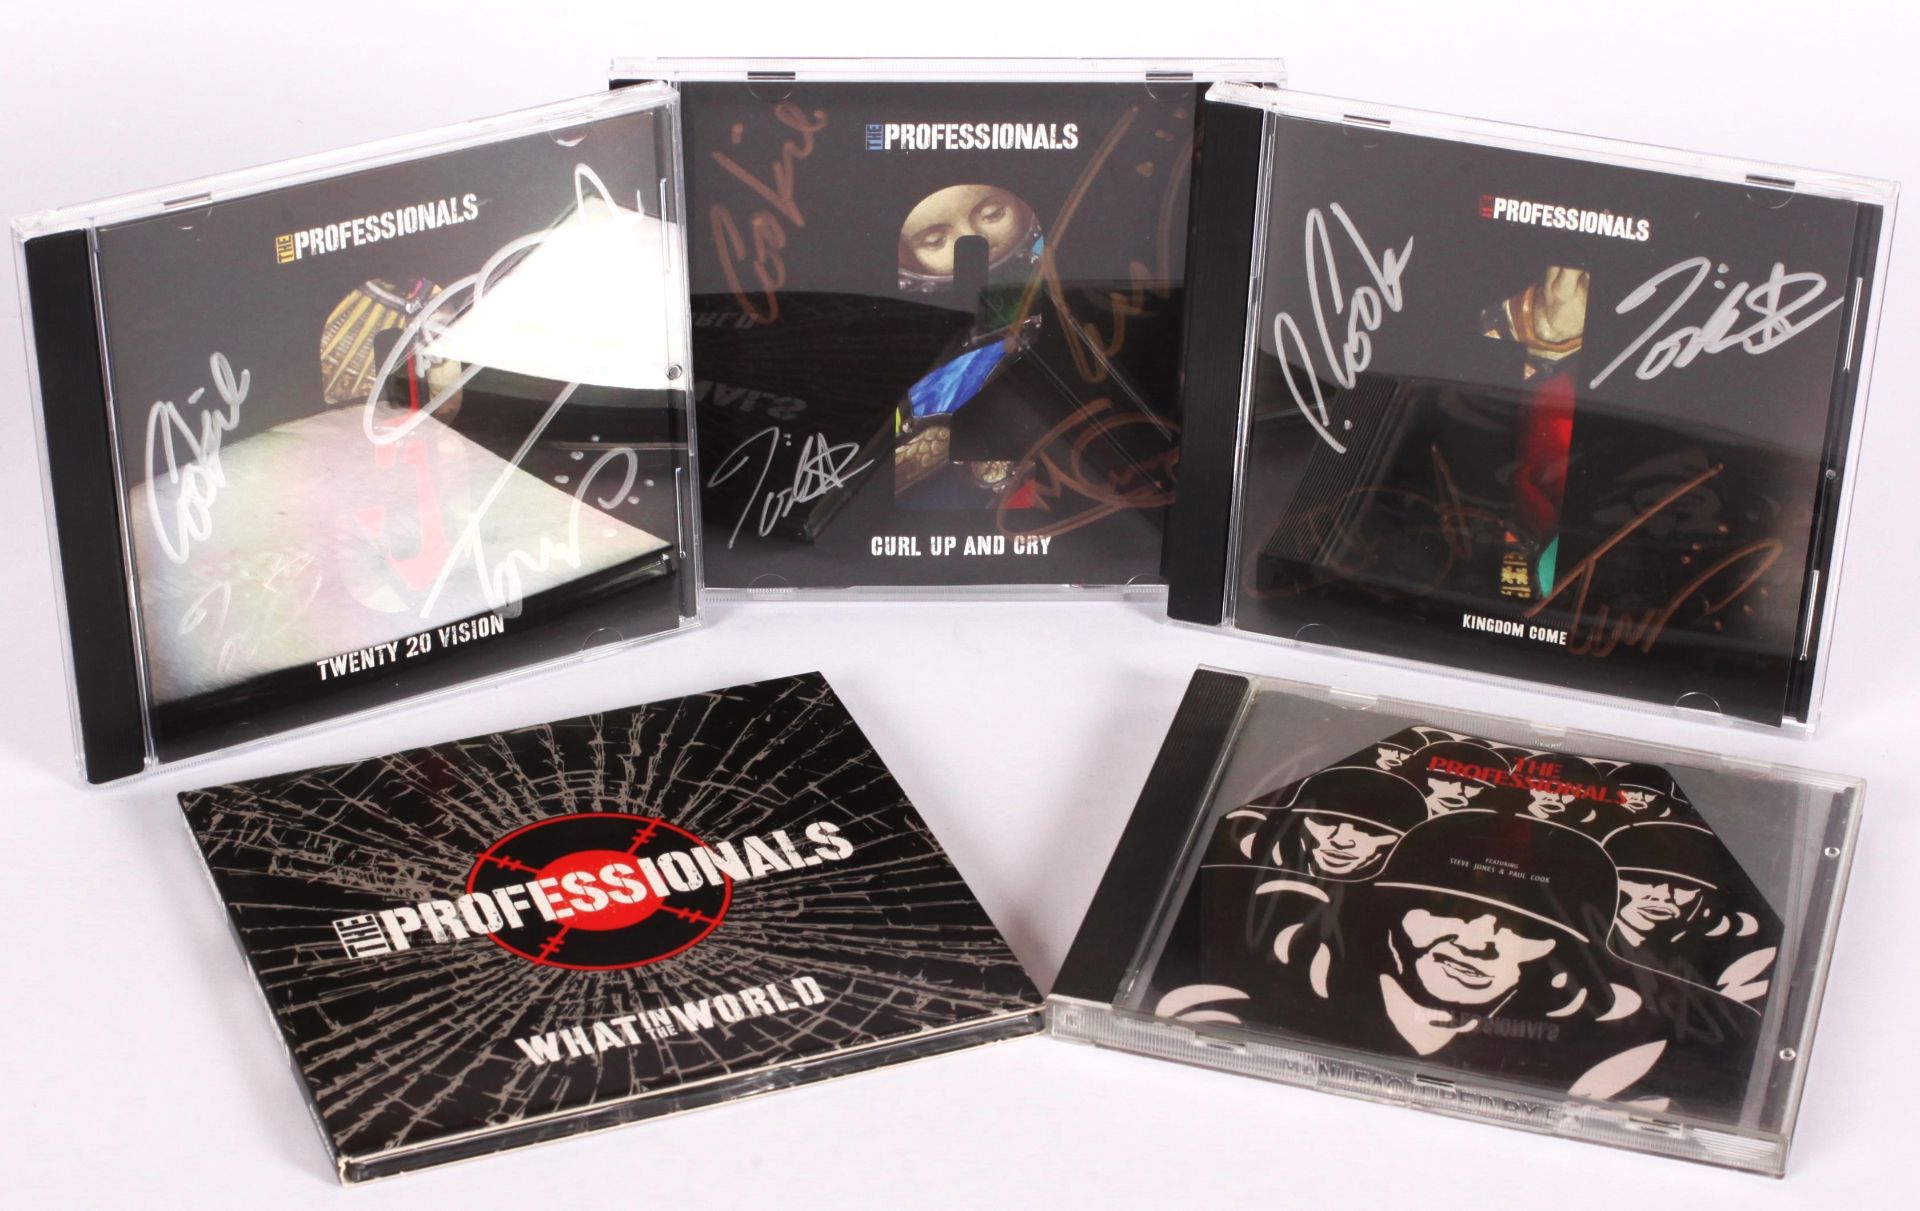 A Collection Of CD Albums By The Professionals